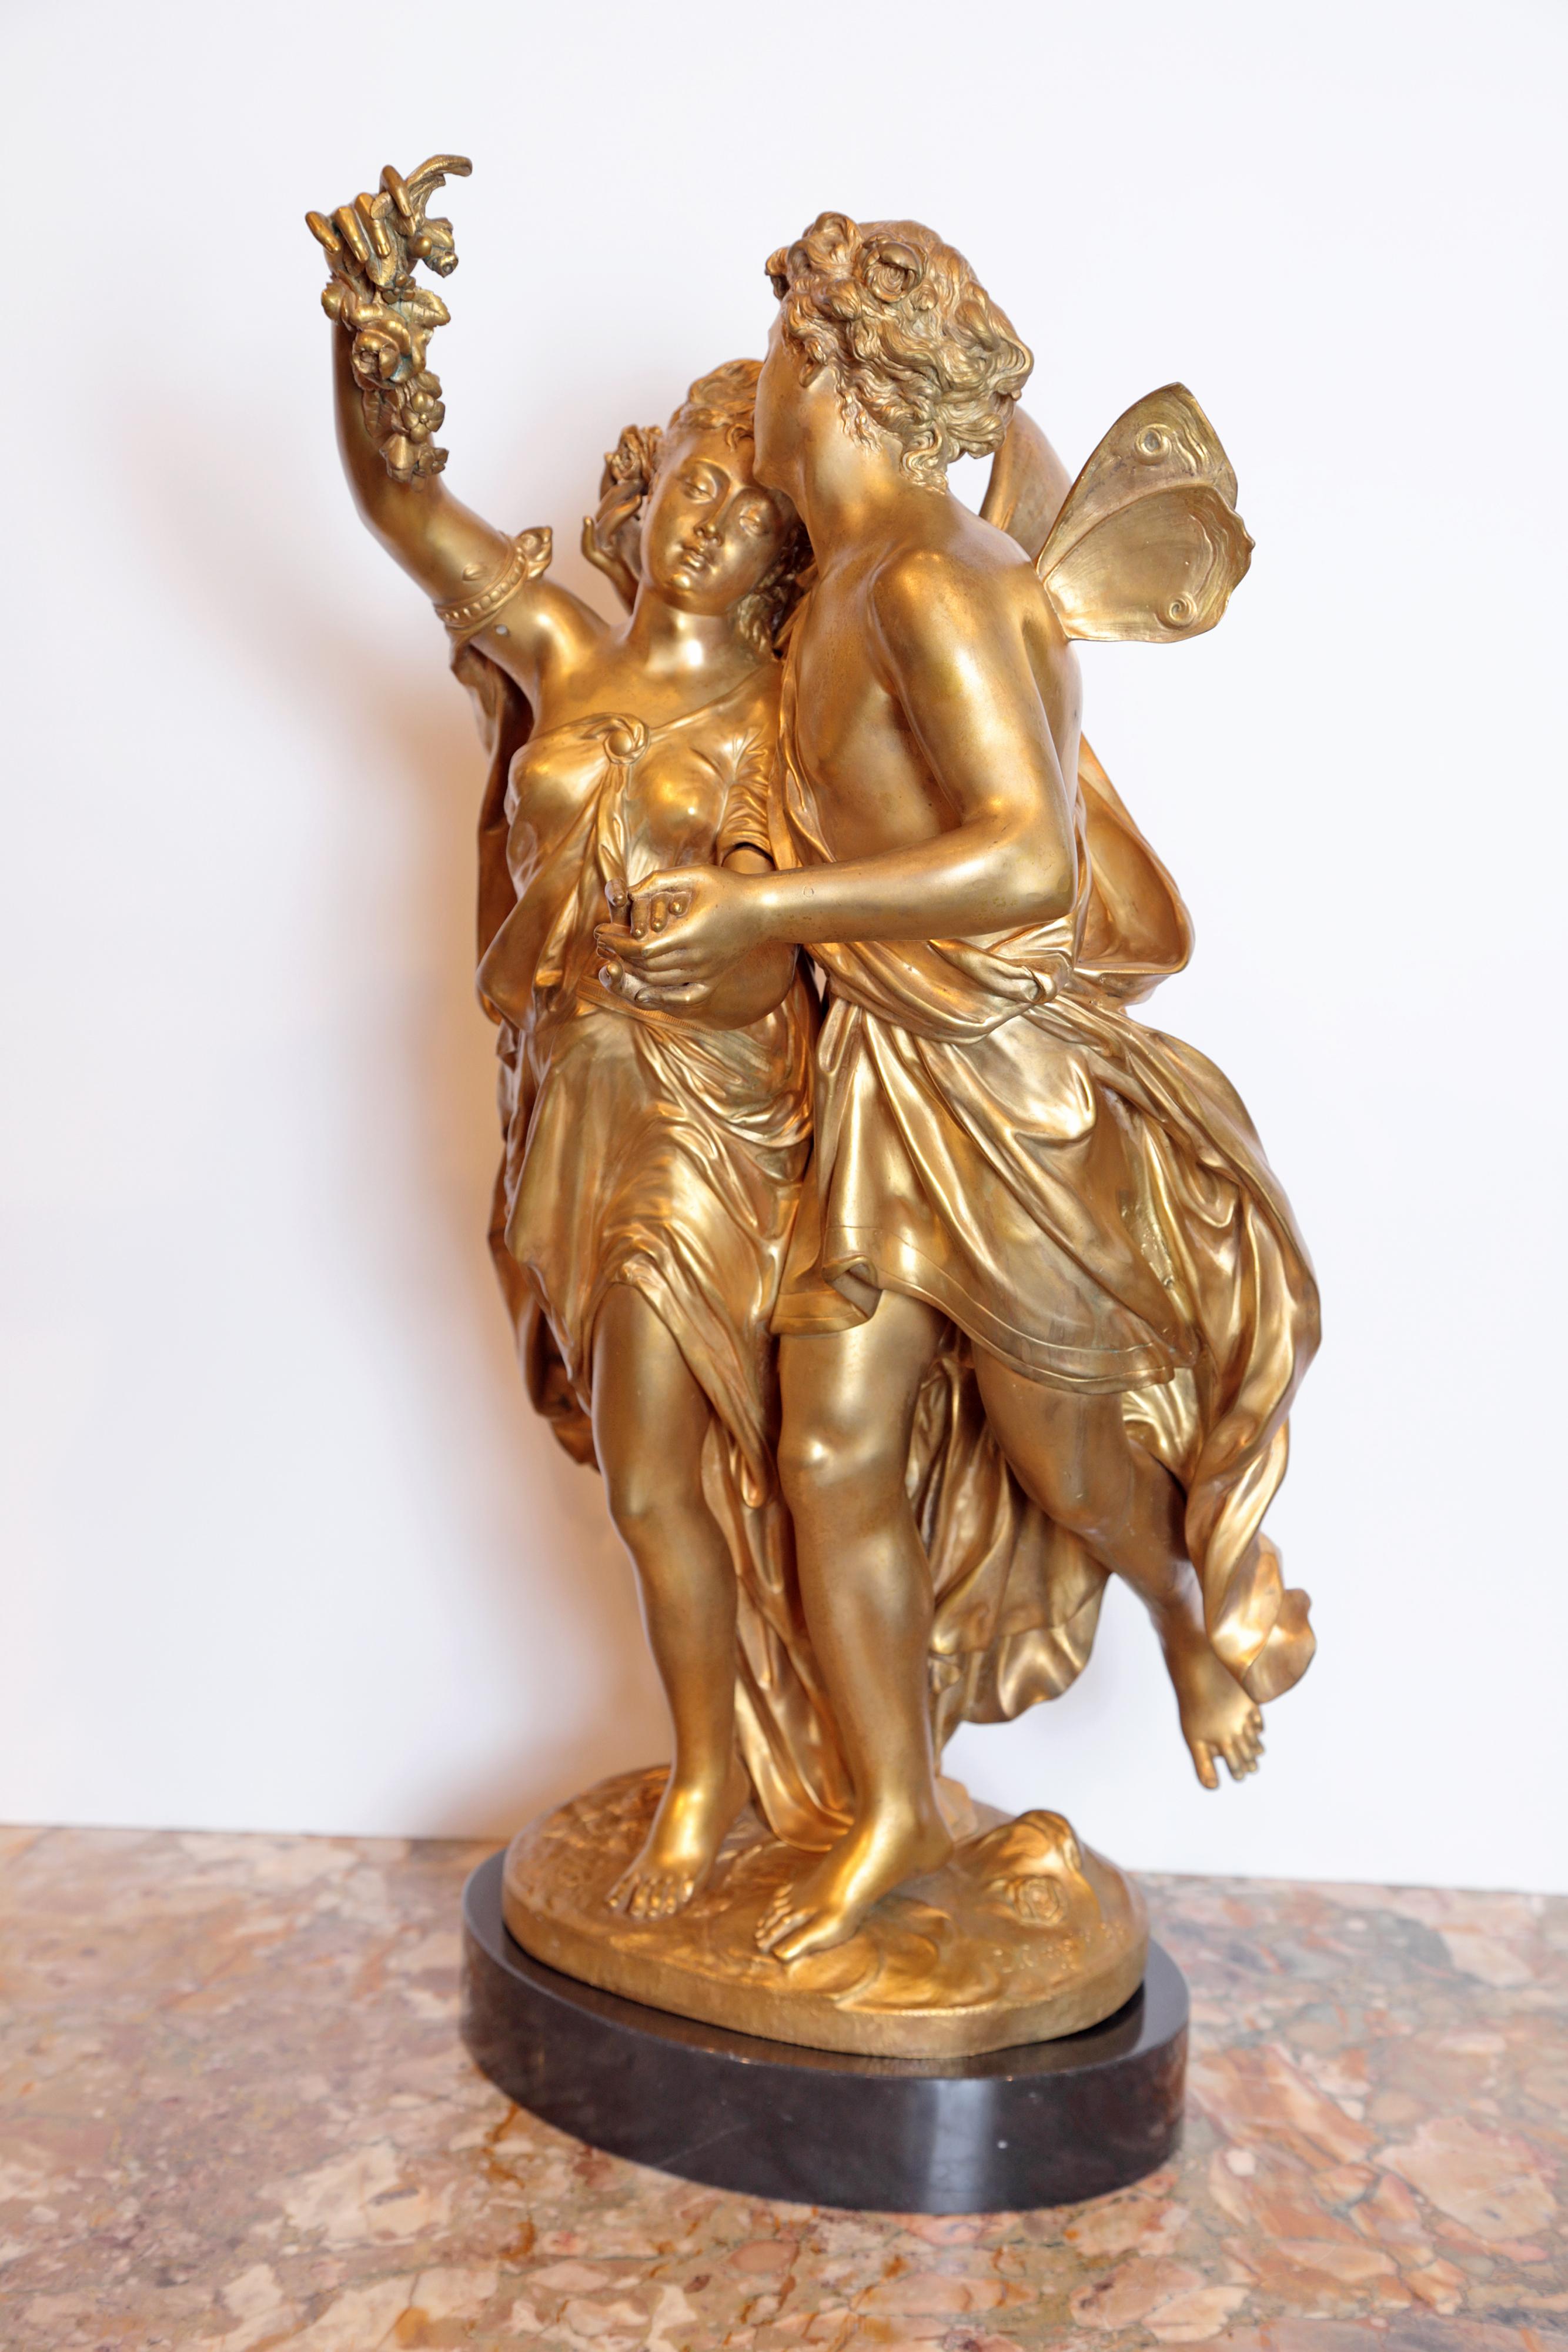 19th century large French gilt bronze figural statue on a marble base.